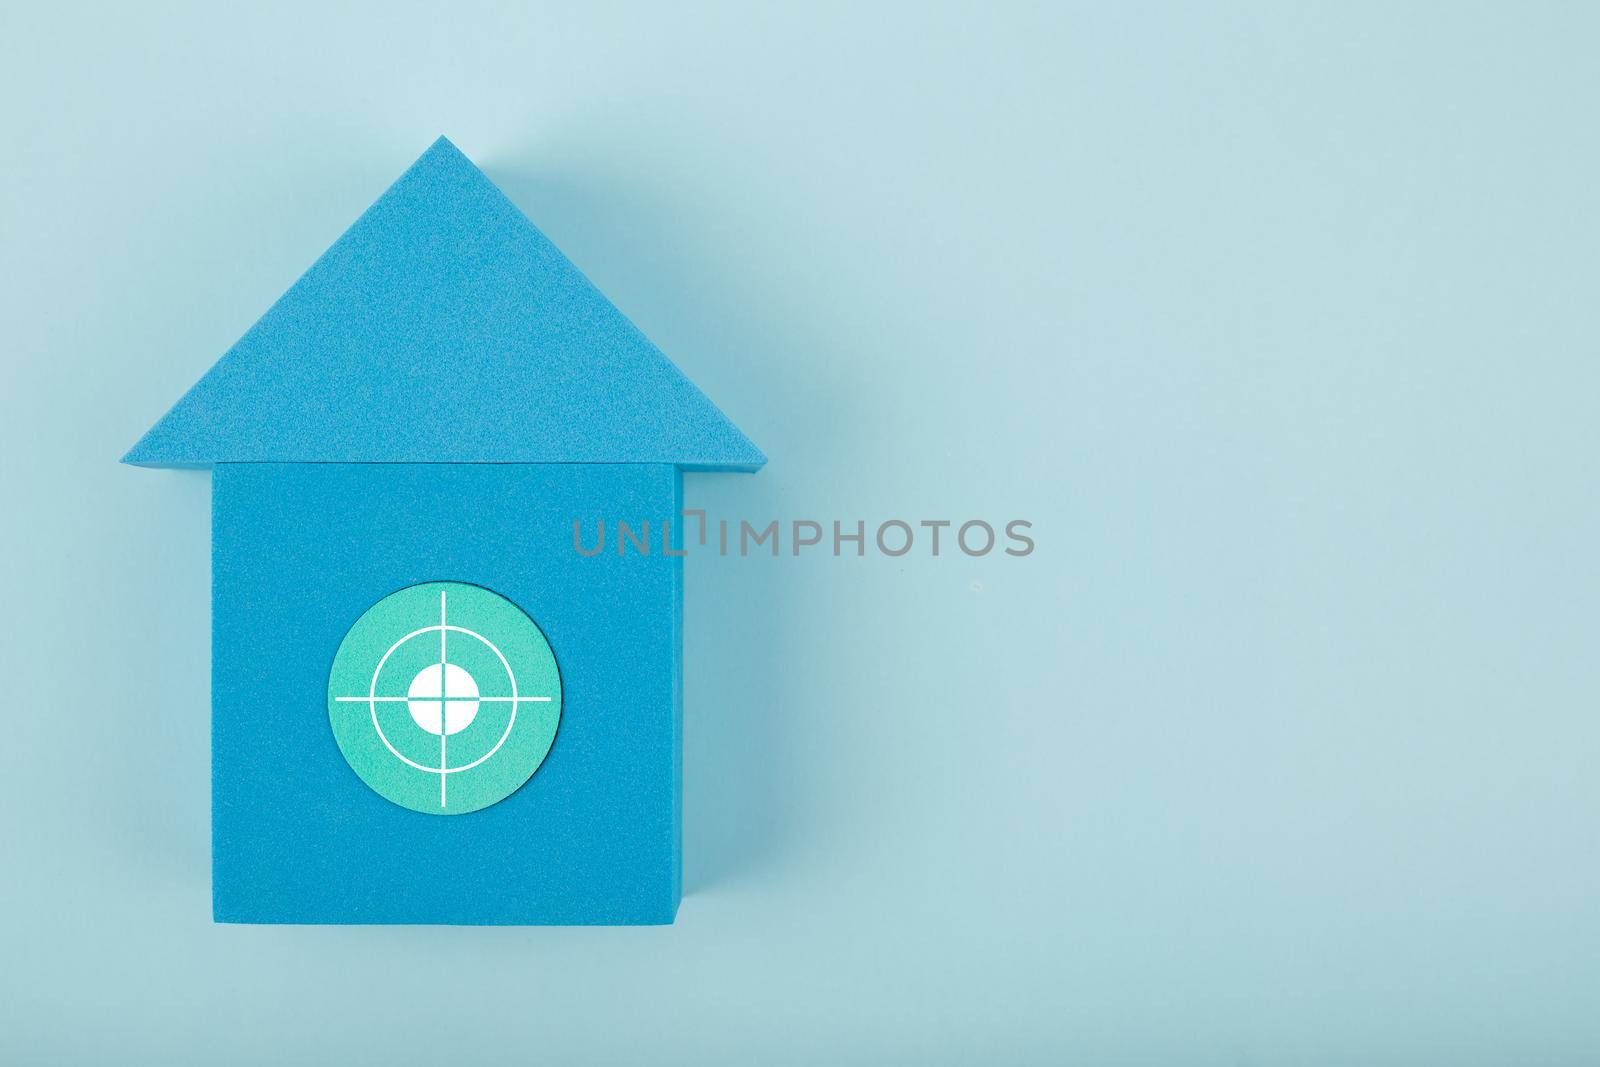 Mortgage, loan or saving money for home and investing in real estate trendy concept. Blue toy house with white target in the middle against bright blue background with copy space